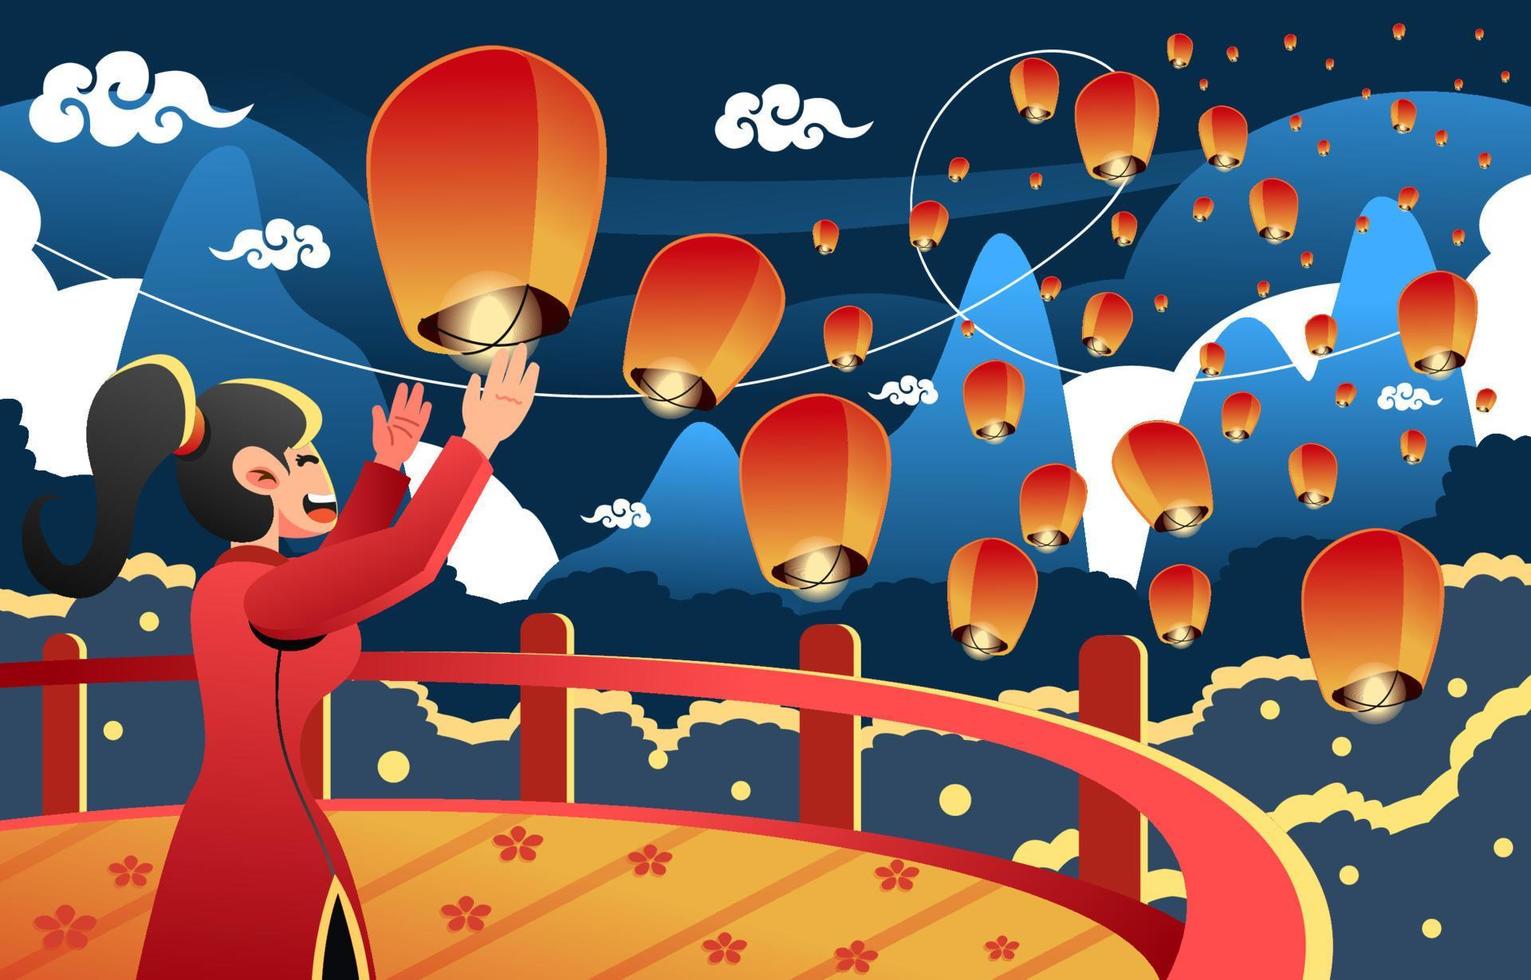 Lantern Festival of Chinese New Year vector